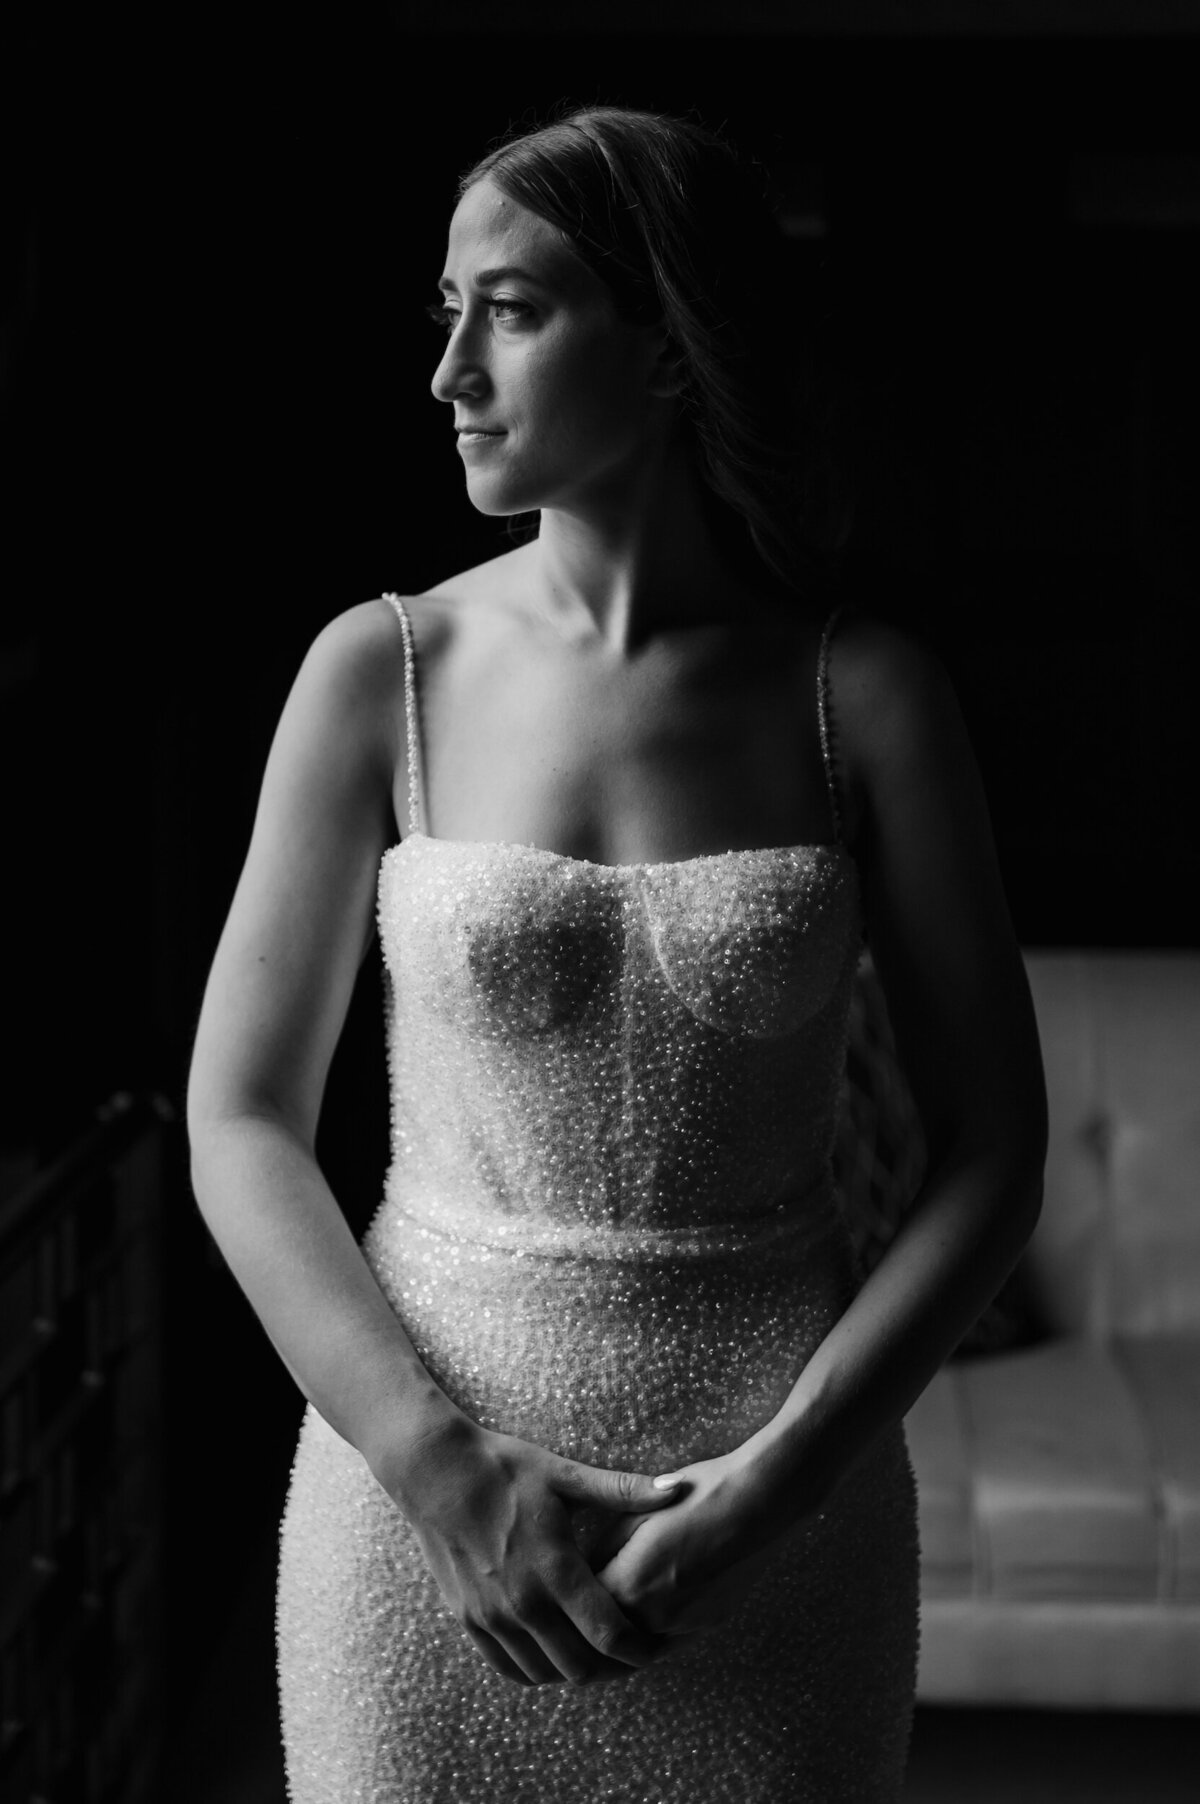 A moody bride wearing a dress with pearls stares out the window at Revel Motor Row